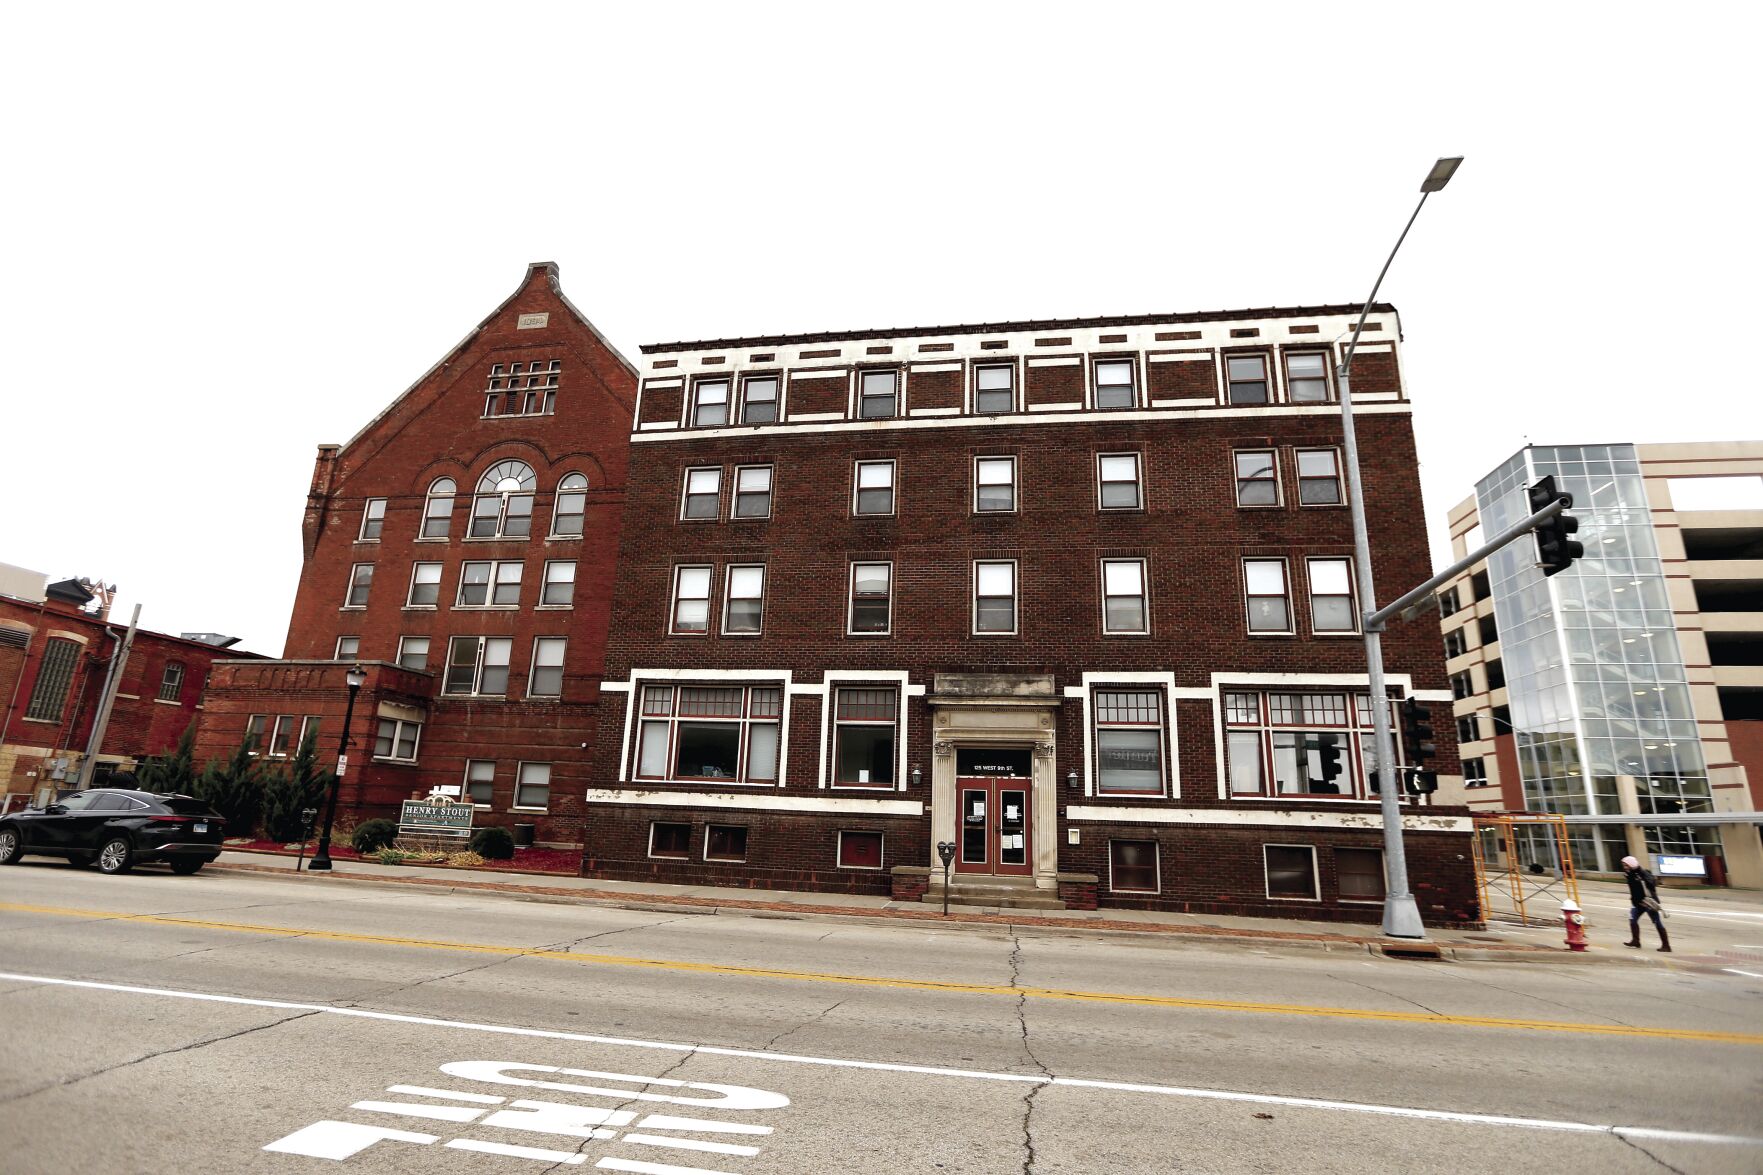 The Henry Stout Senior Apartments building is located at 125 W. Ninth St. in Dubuque.    PHOTO CREDIT: Dave Kettering